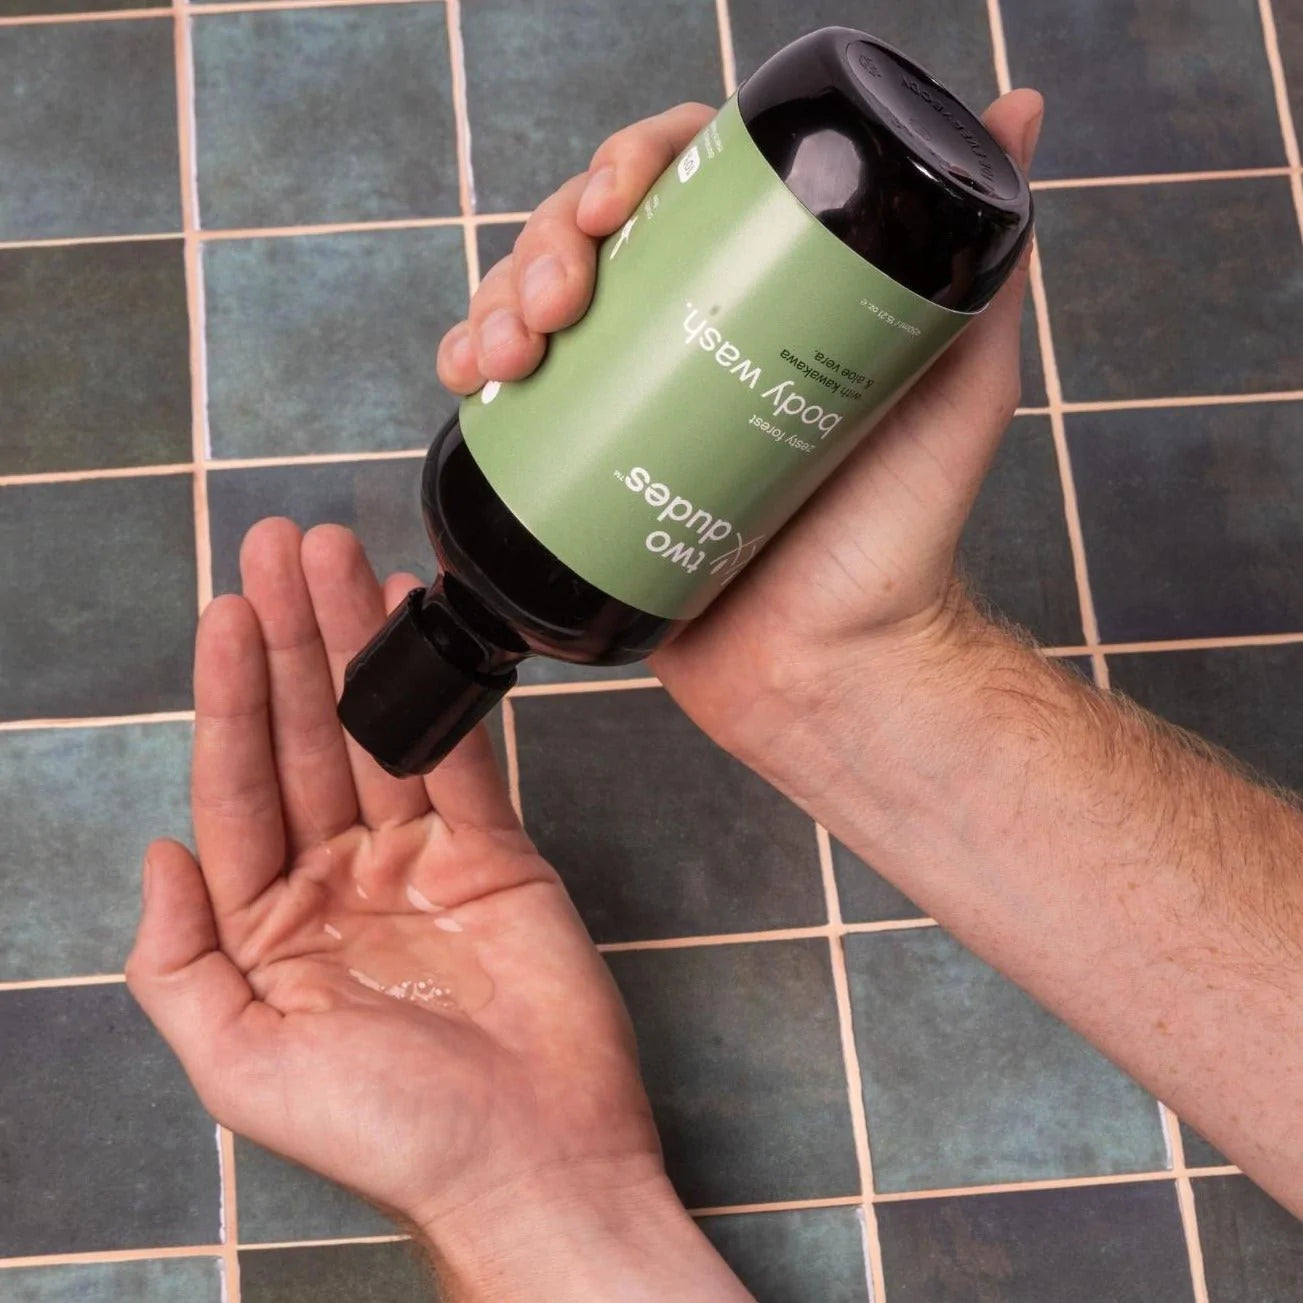 Dispensing Two Dudes kawakawa aloe vera zesty forest body wash into palm over tiled background.